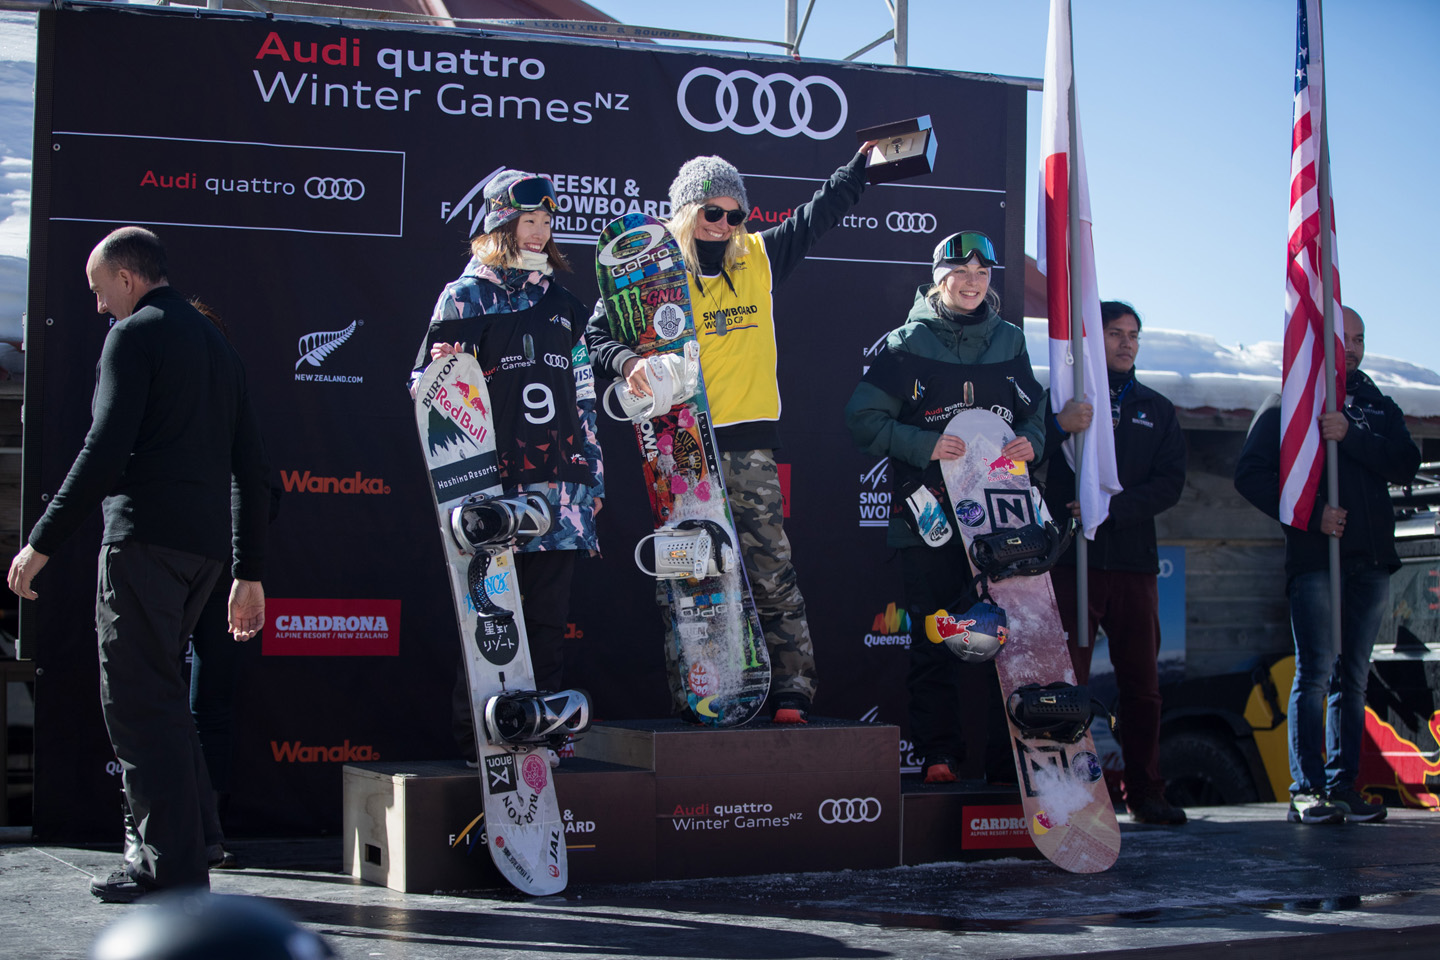 Monster Energy's Jamie Anderson Wins Season's First Snowboard Slopestyle World Cup at the Winter Games in New Zealand